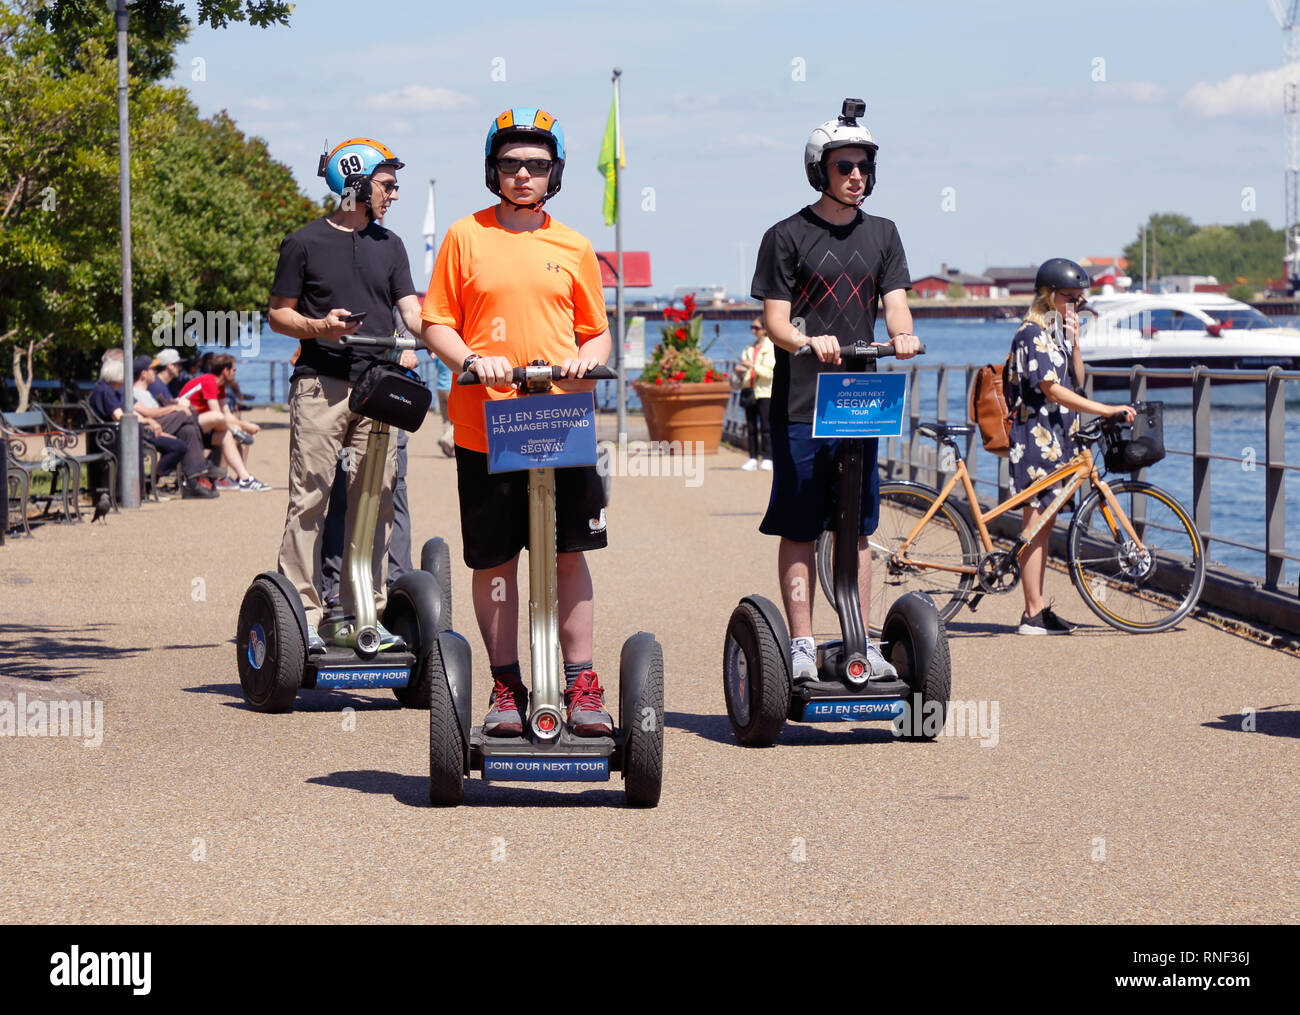 Copenhagen, Denmark - June 27, 2018:  A small group of people are using Segway two-wheeled self-balancing personal transporters near the Little Mermai Stock Photo